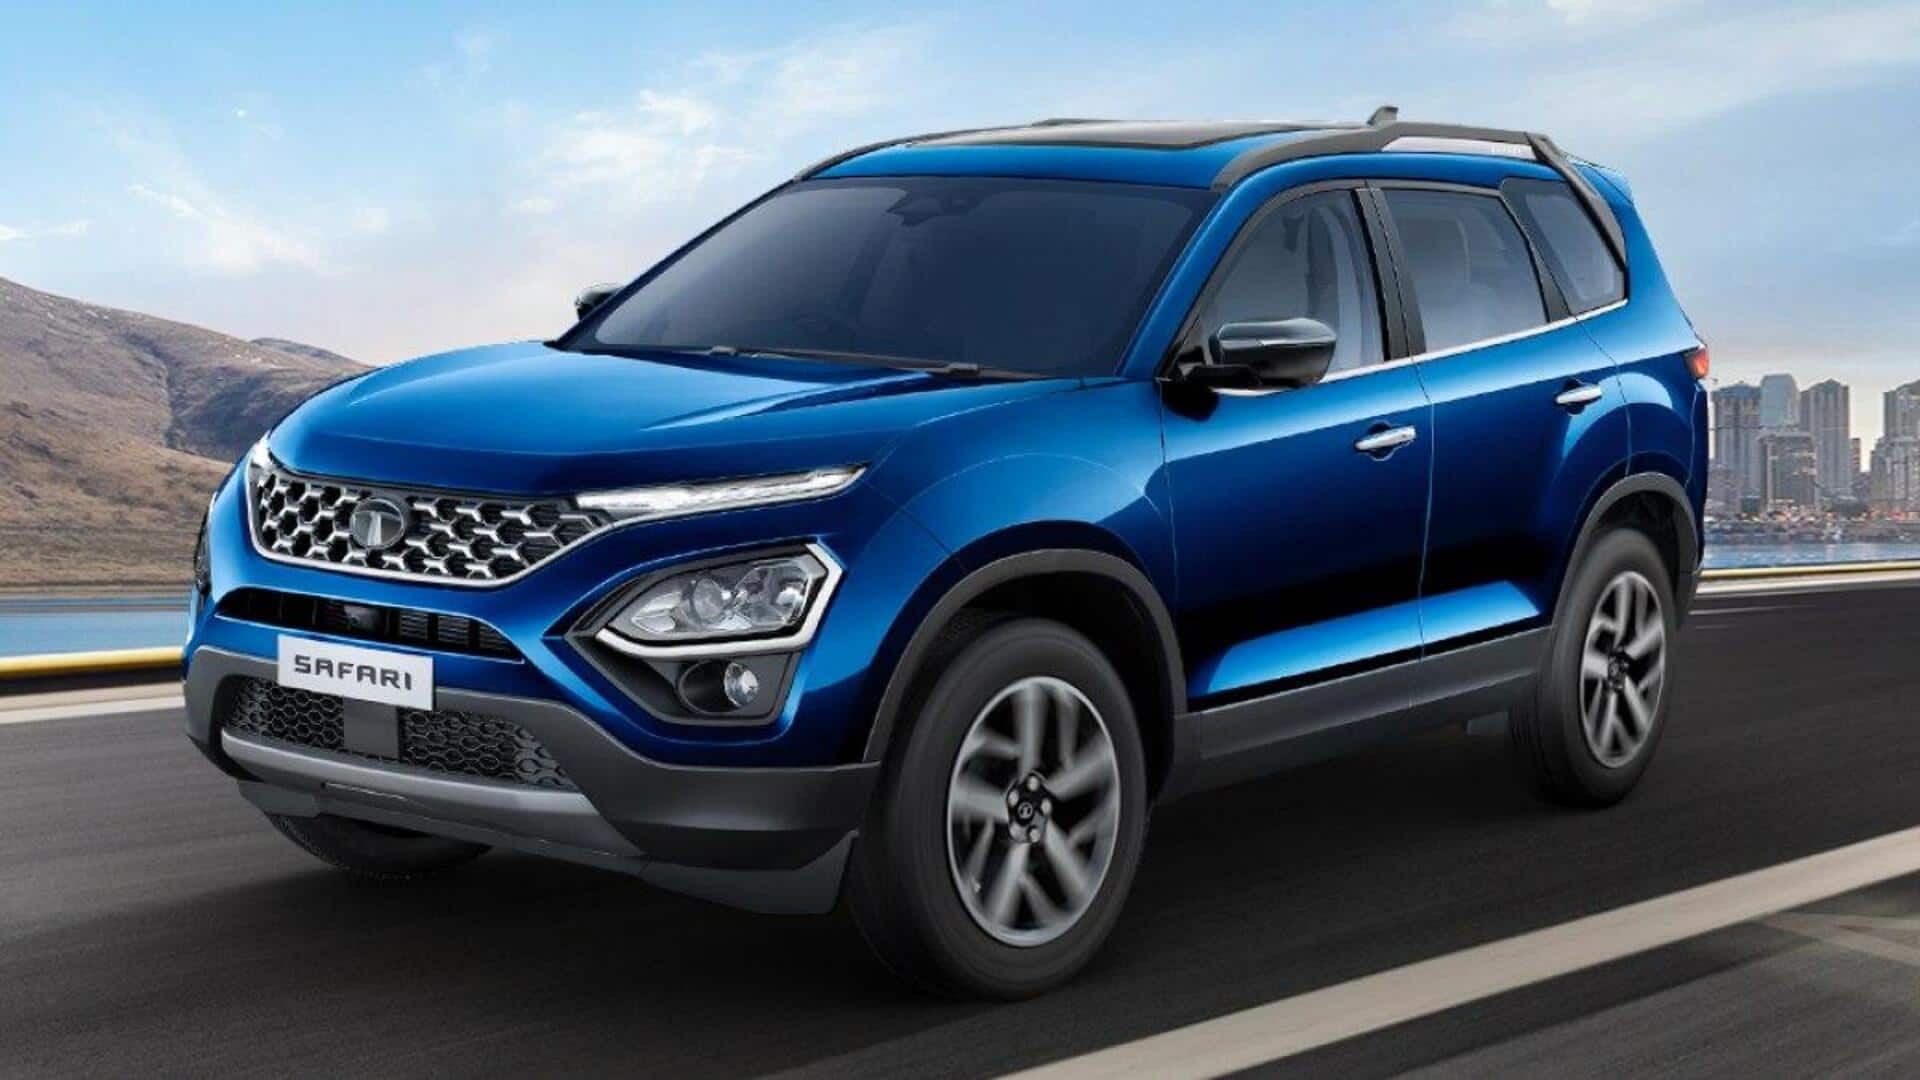 Tata Safari, Harrier available with ₹1.25 lakh discount this month